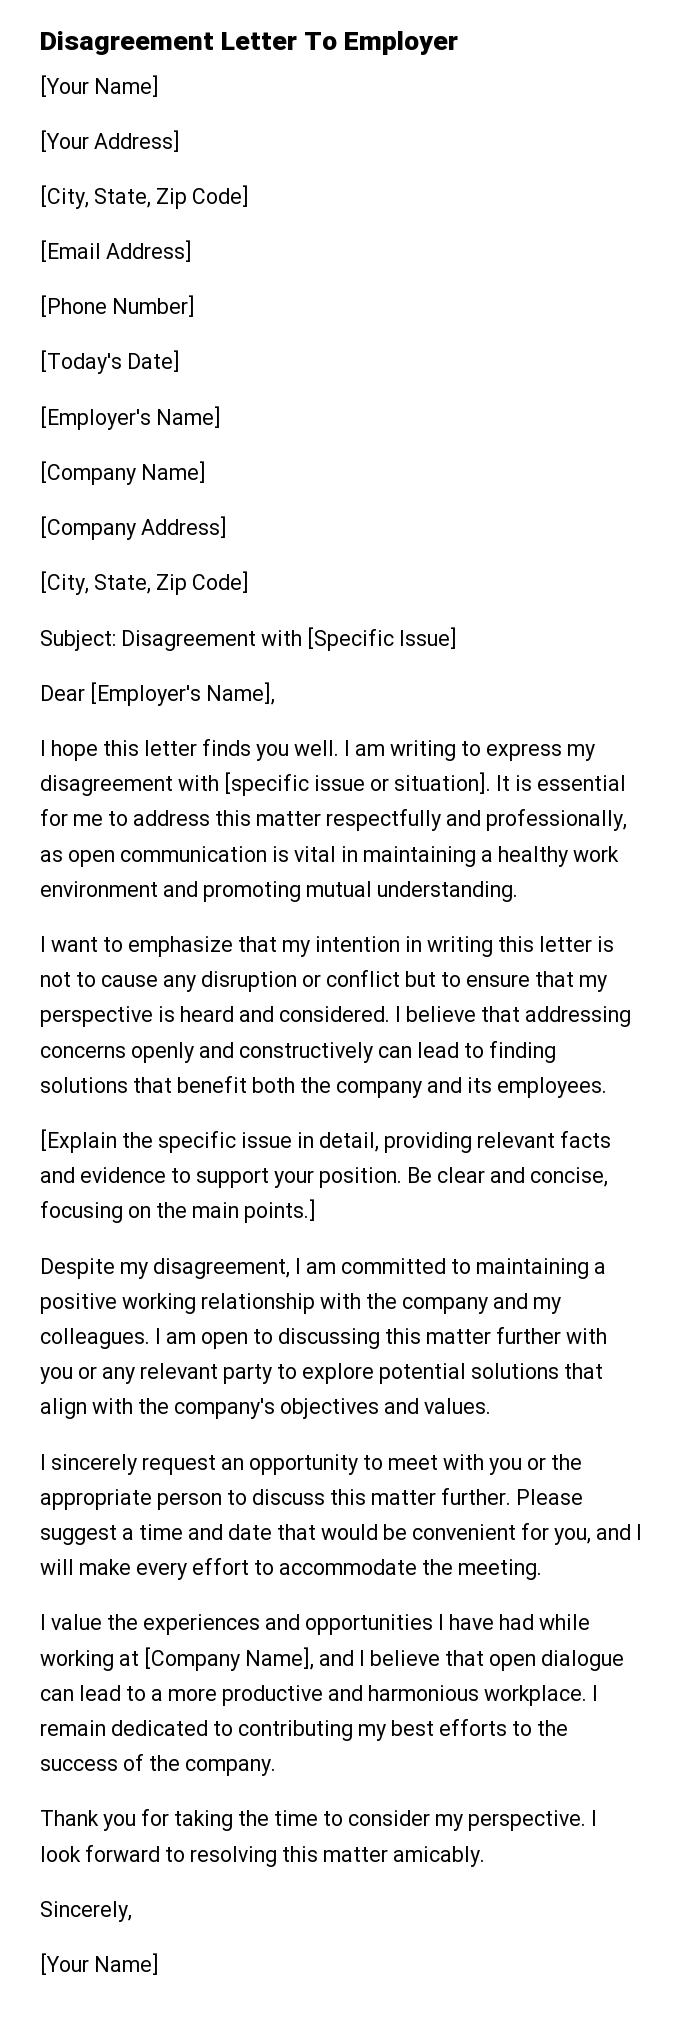 Disagreement Letter To Employer